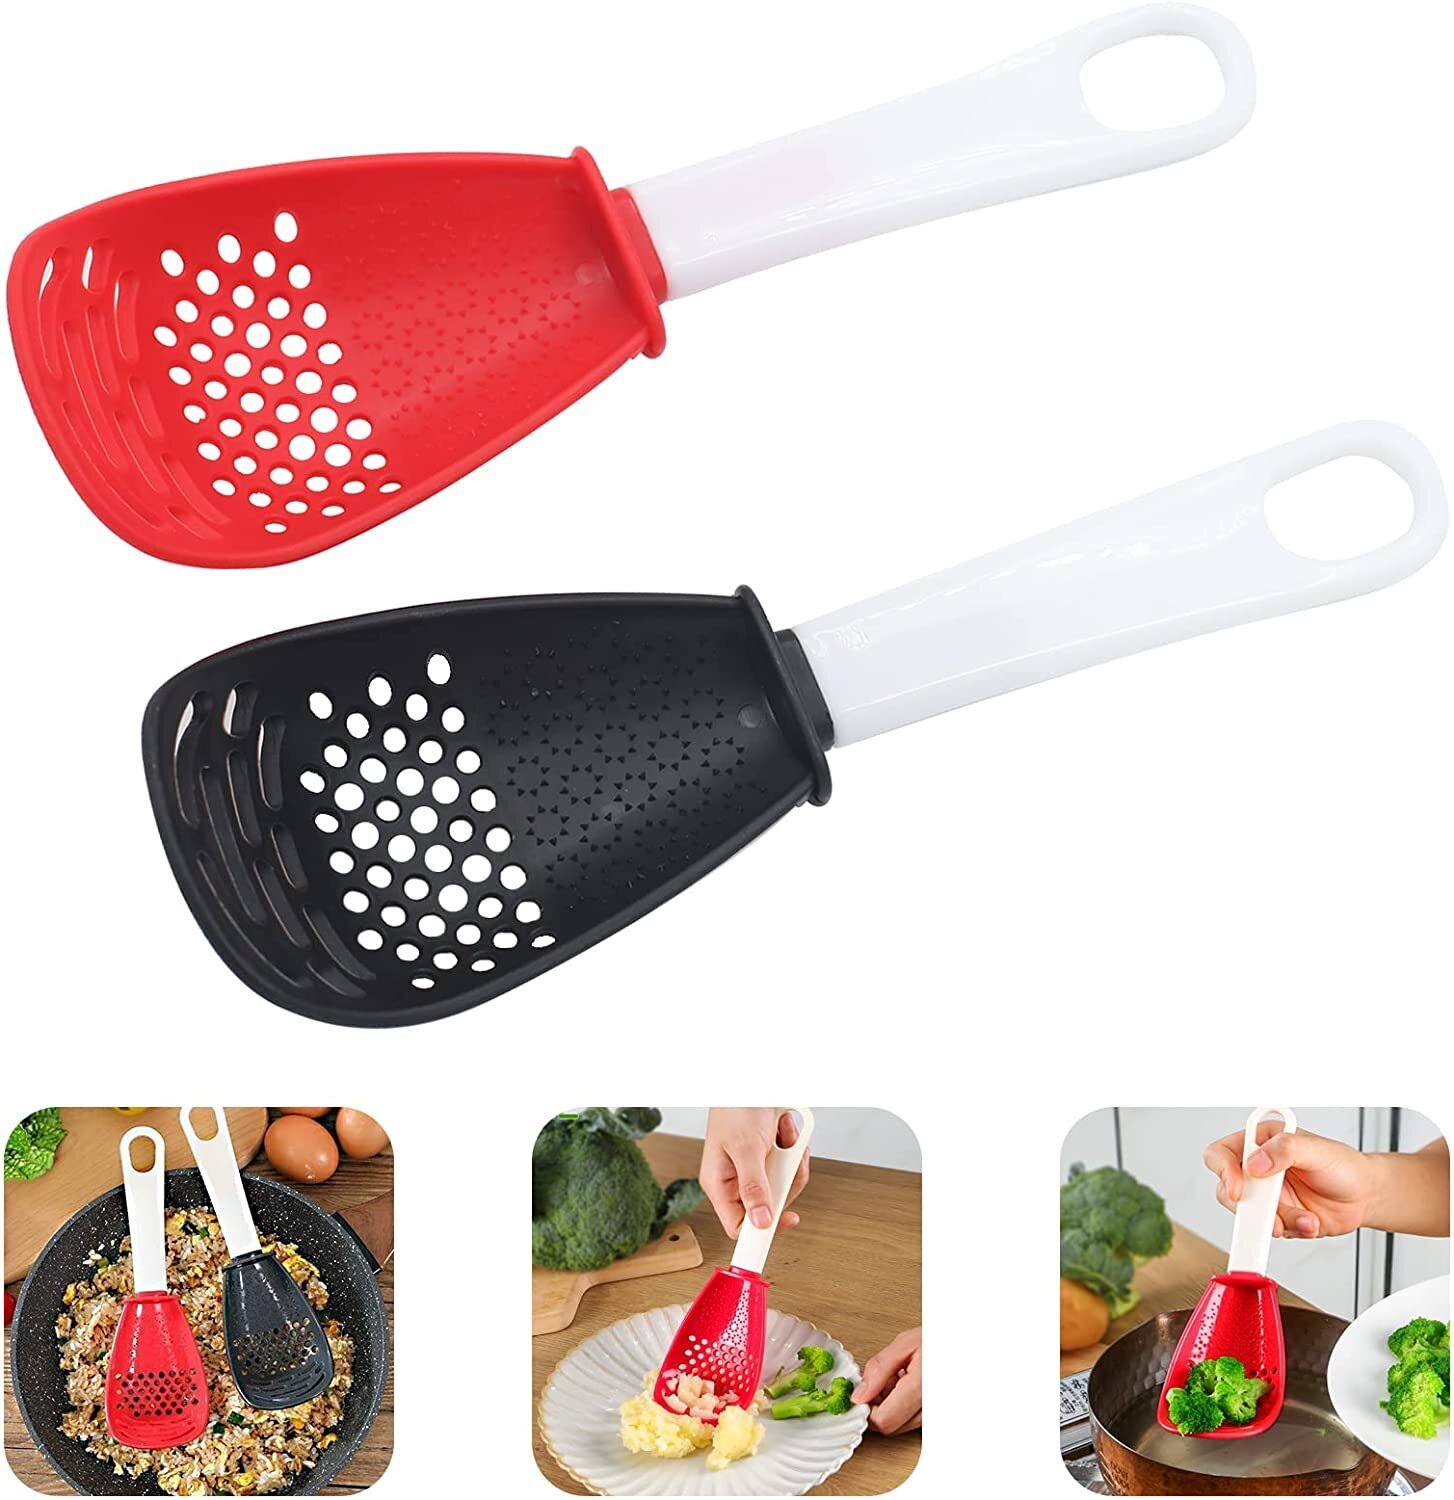 Multifunction Cooking Spoon All-In-One Kitchen Utensil Tool (Red)